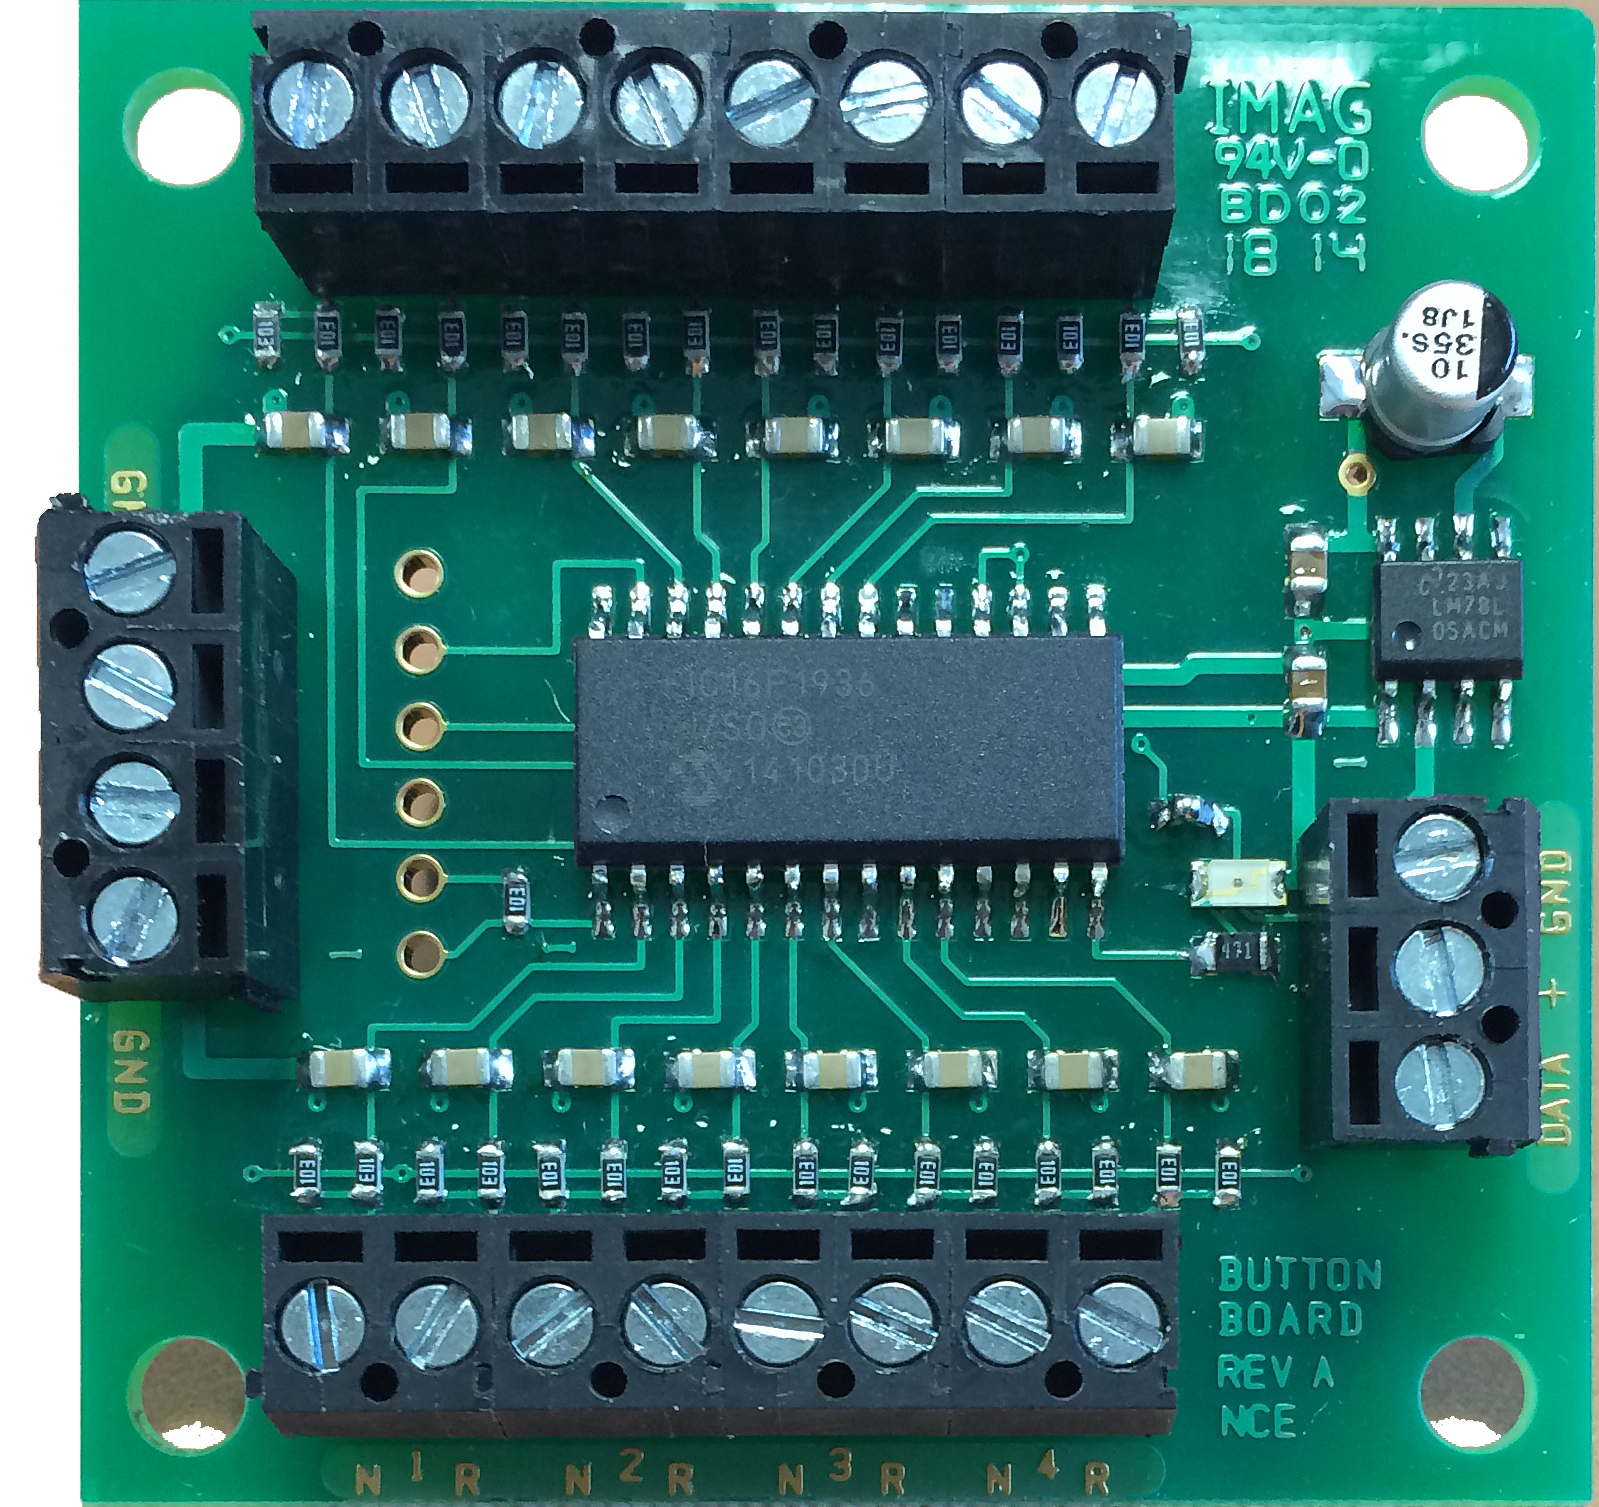 NCE "Button Board" for Switch-8 Mk2